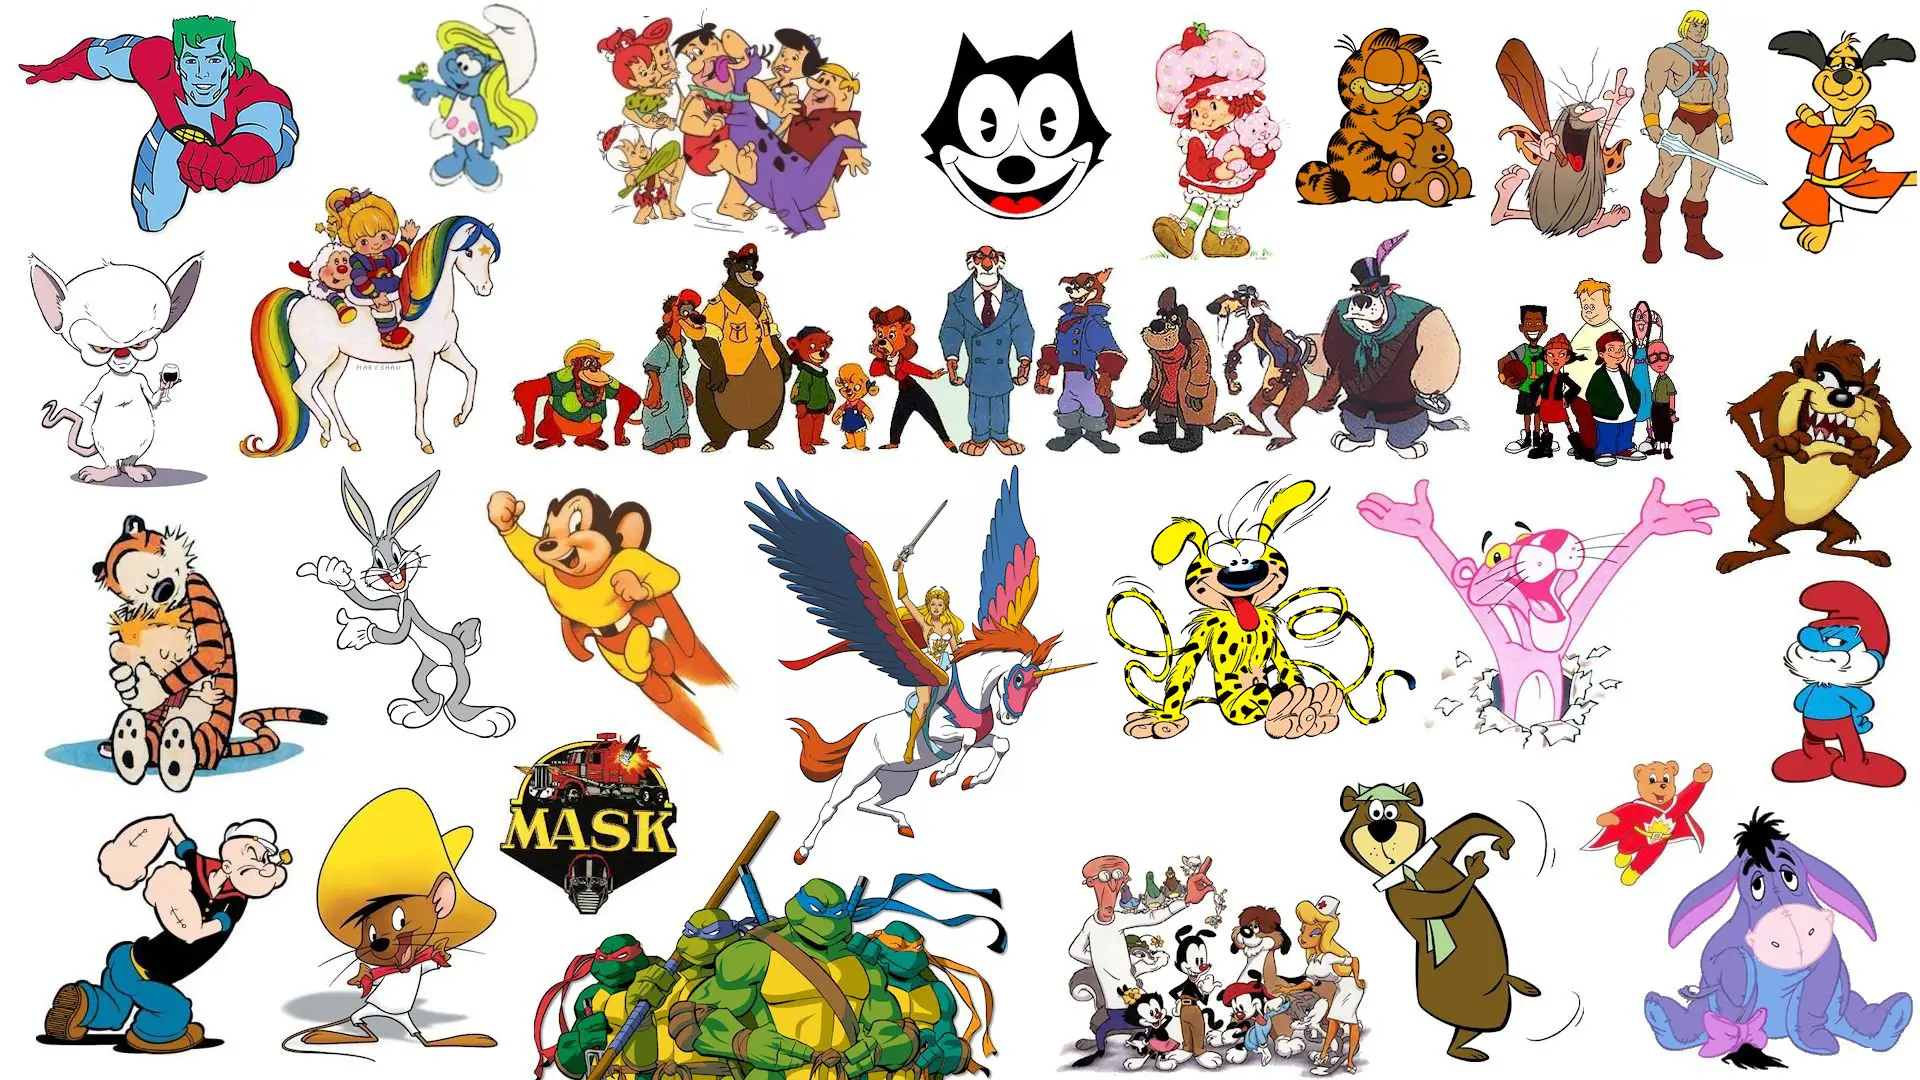 15 forgotten cartoons from the early 1970s you used to love